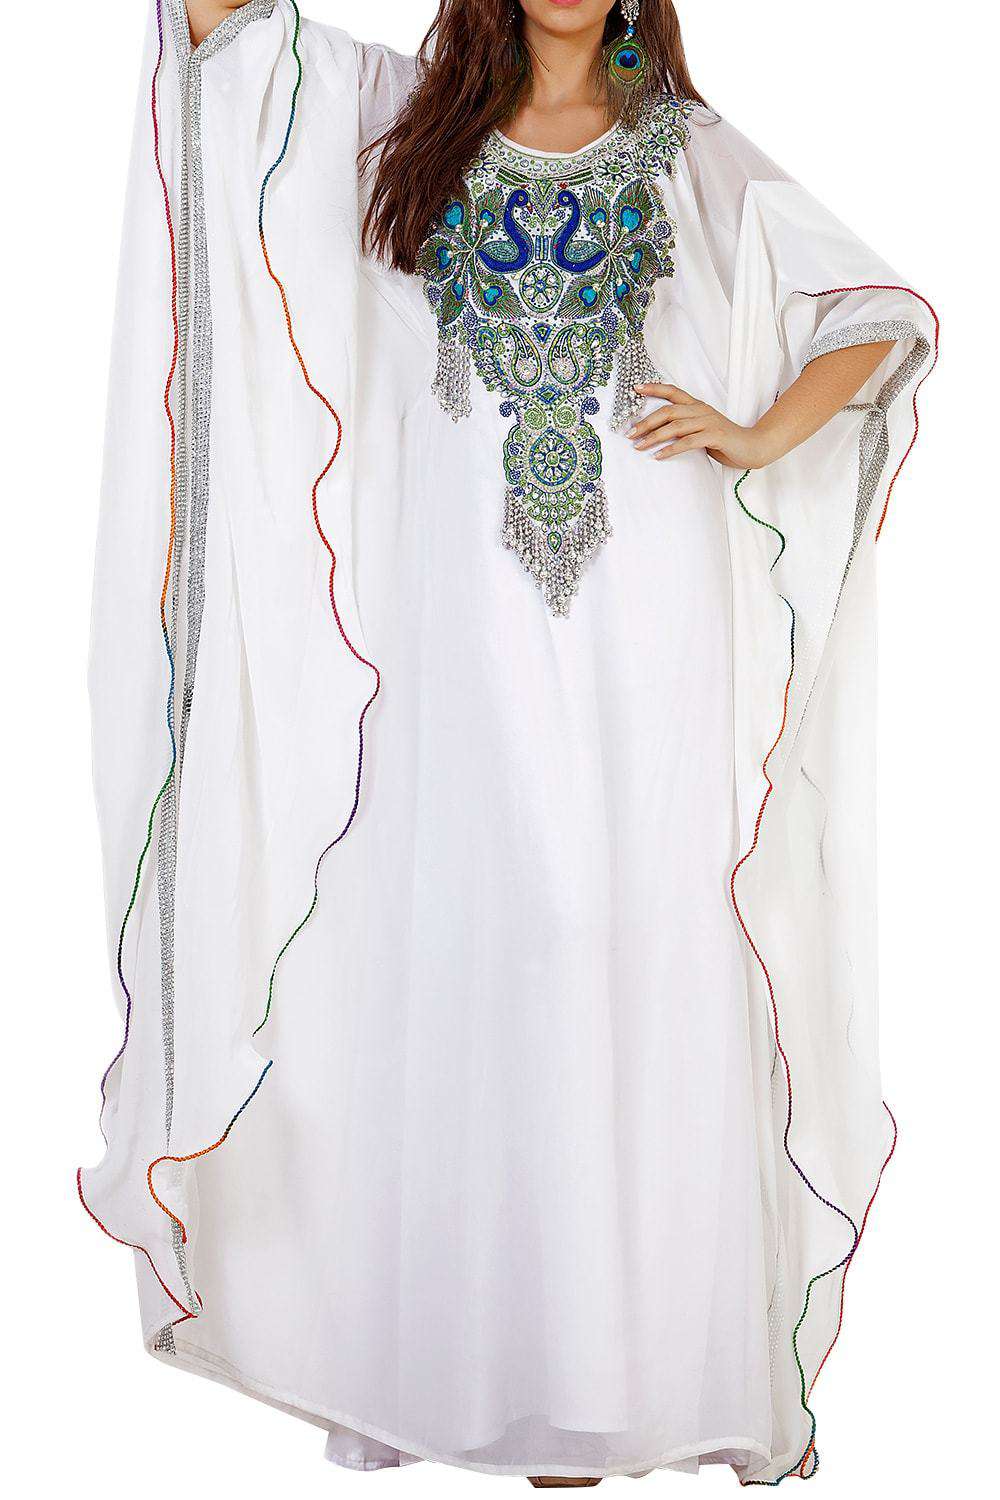 Buy Beautiful White Peacock Embroidered ...